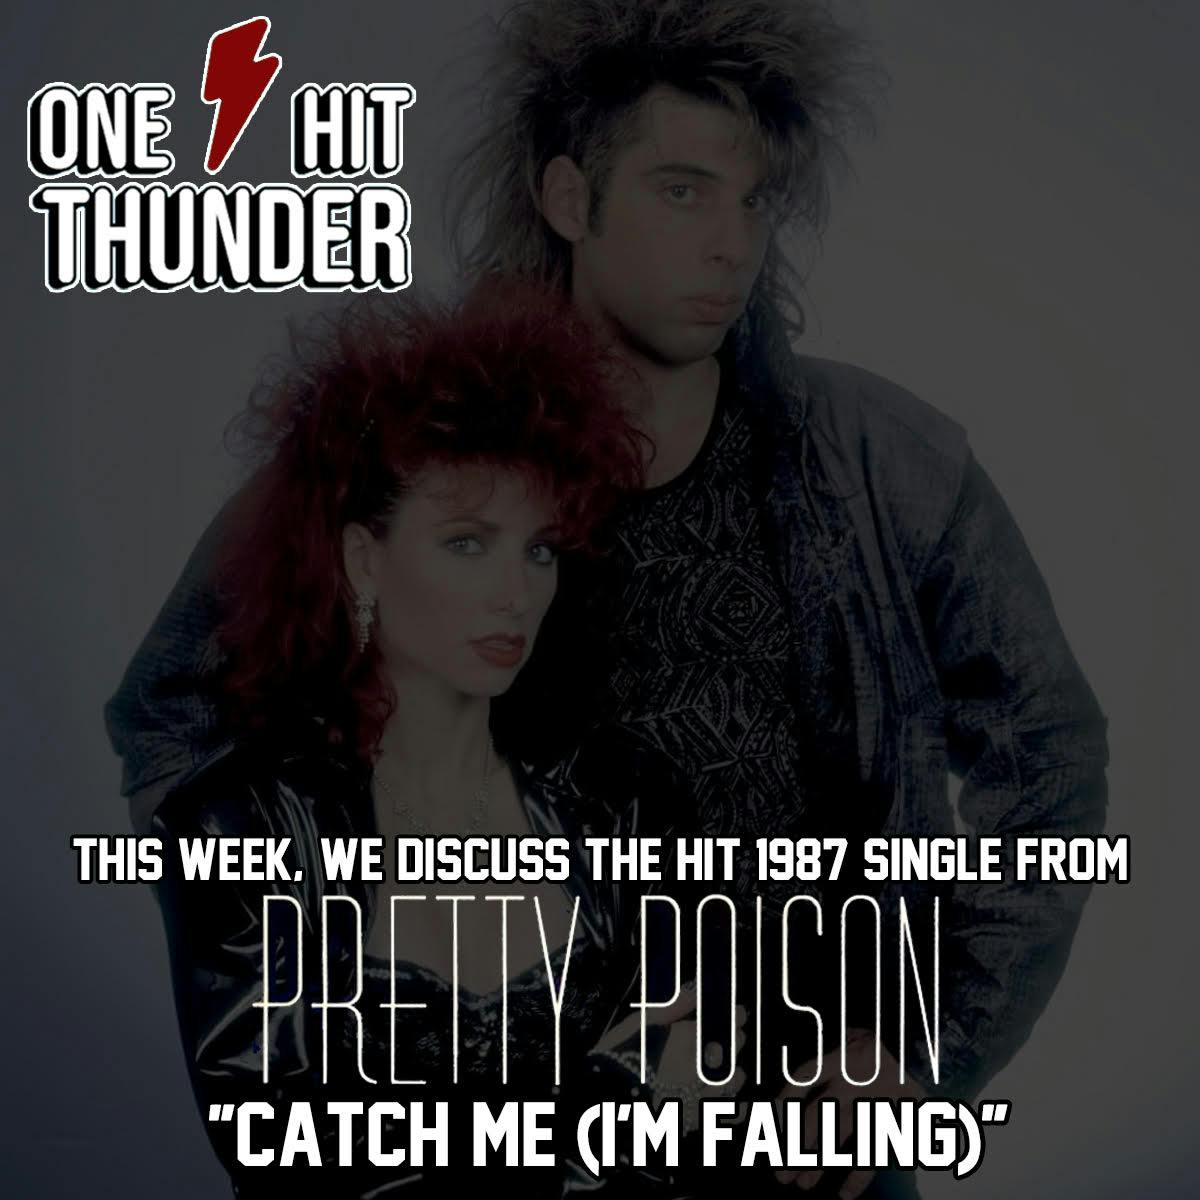 ”Catch Me (I’m Falling)” by Pretty Poison